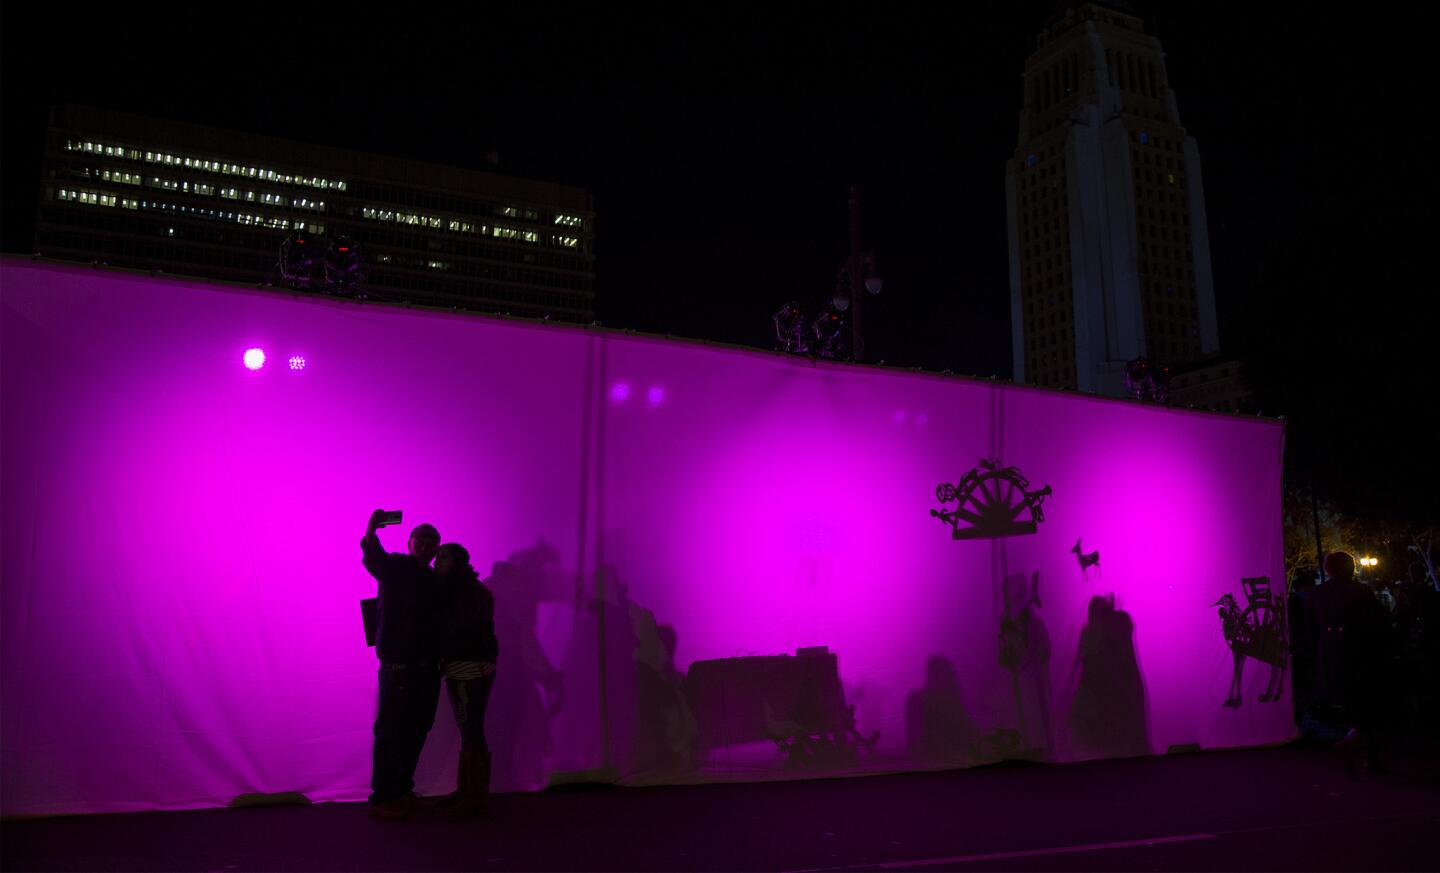 A couple pose for a selfie outside a puppet booth during the New Year's Eve celebration at Grand Park in Los Angeles.